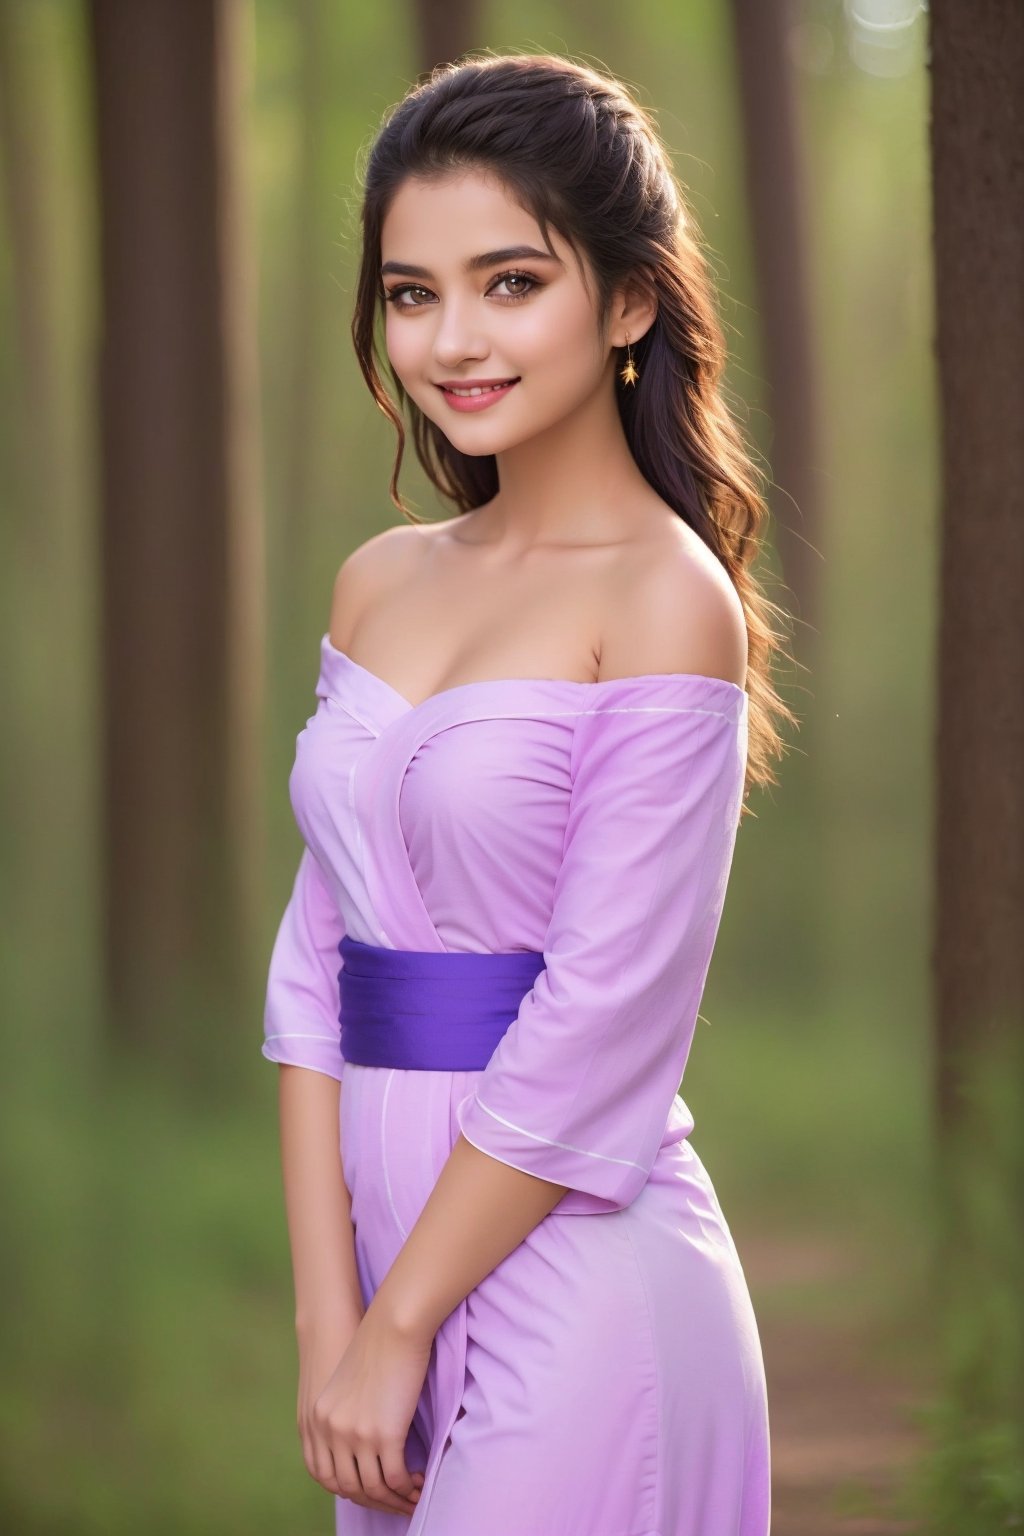 (1girl, medium breast, off-shoulder red yukata, bashful, in love, drunk, fireflies in background, alluring smile, beautiful small hands, photo of perfecteyes eyes), masterpiece, best quality, high resolution, UHD, realism, realistic, depth of field, wide view, raytraced, full length body, mystical, luminous, translucent, beautiful, stunning, a mythical being exuding energy, textures, breathtaking beauty, pure perfection, with a divine presence, unforgettable, and impressive.,Indian